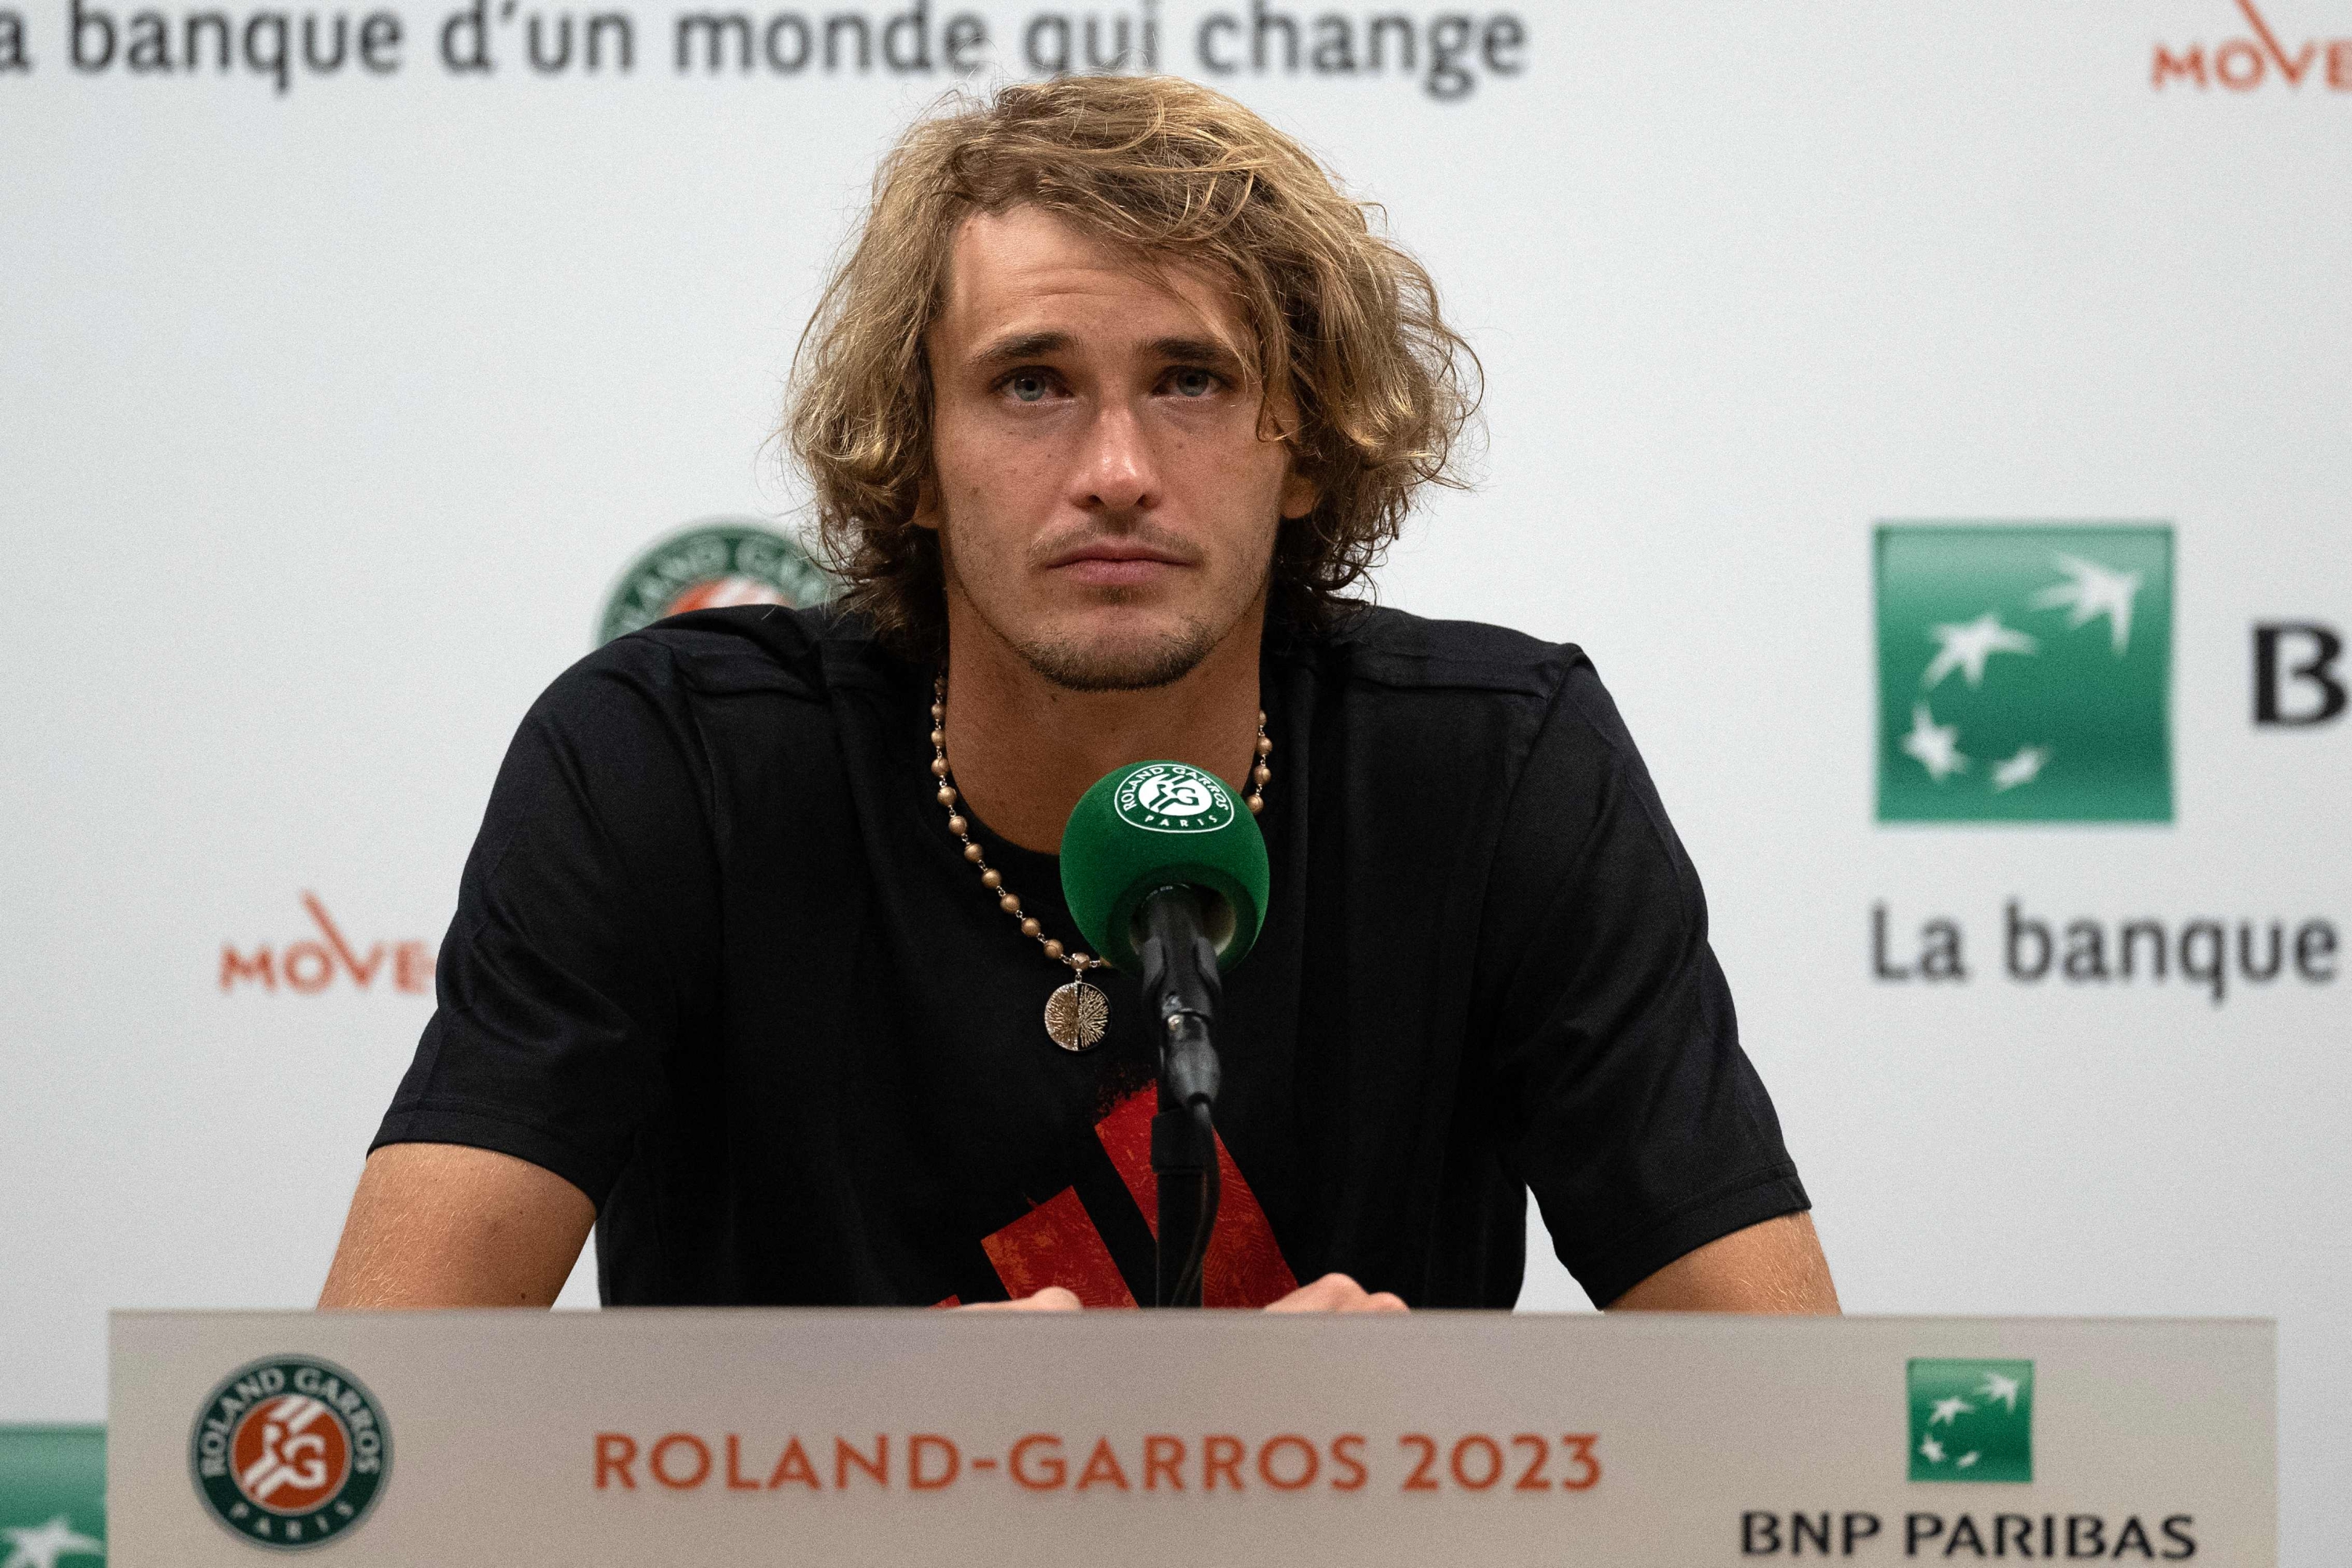 Germany's Alexander Zverev speaks during a press conference after his victory over Bulgaria's Grigor Dimitrov, following their men's singles match on day nine of the Roland-Garros Open tennis tournament at the Court Philippe-Chatrier in Paris on June 5, 2023. (Photo by Sébastien BERDA / AFP)